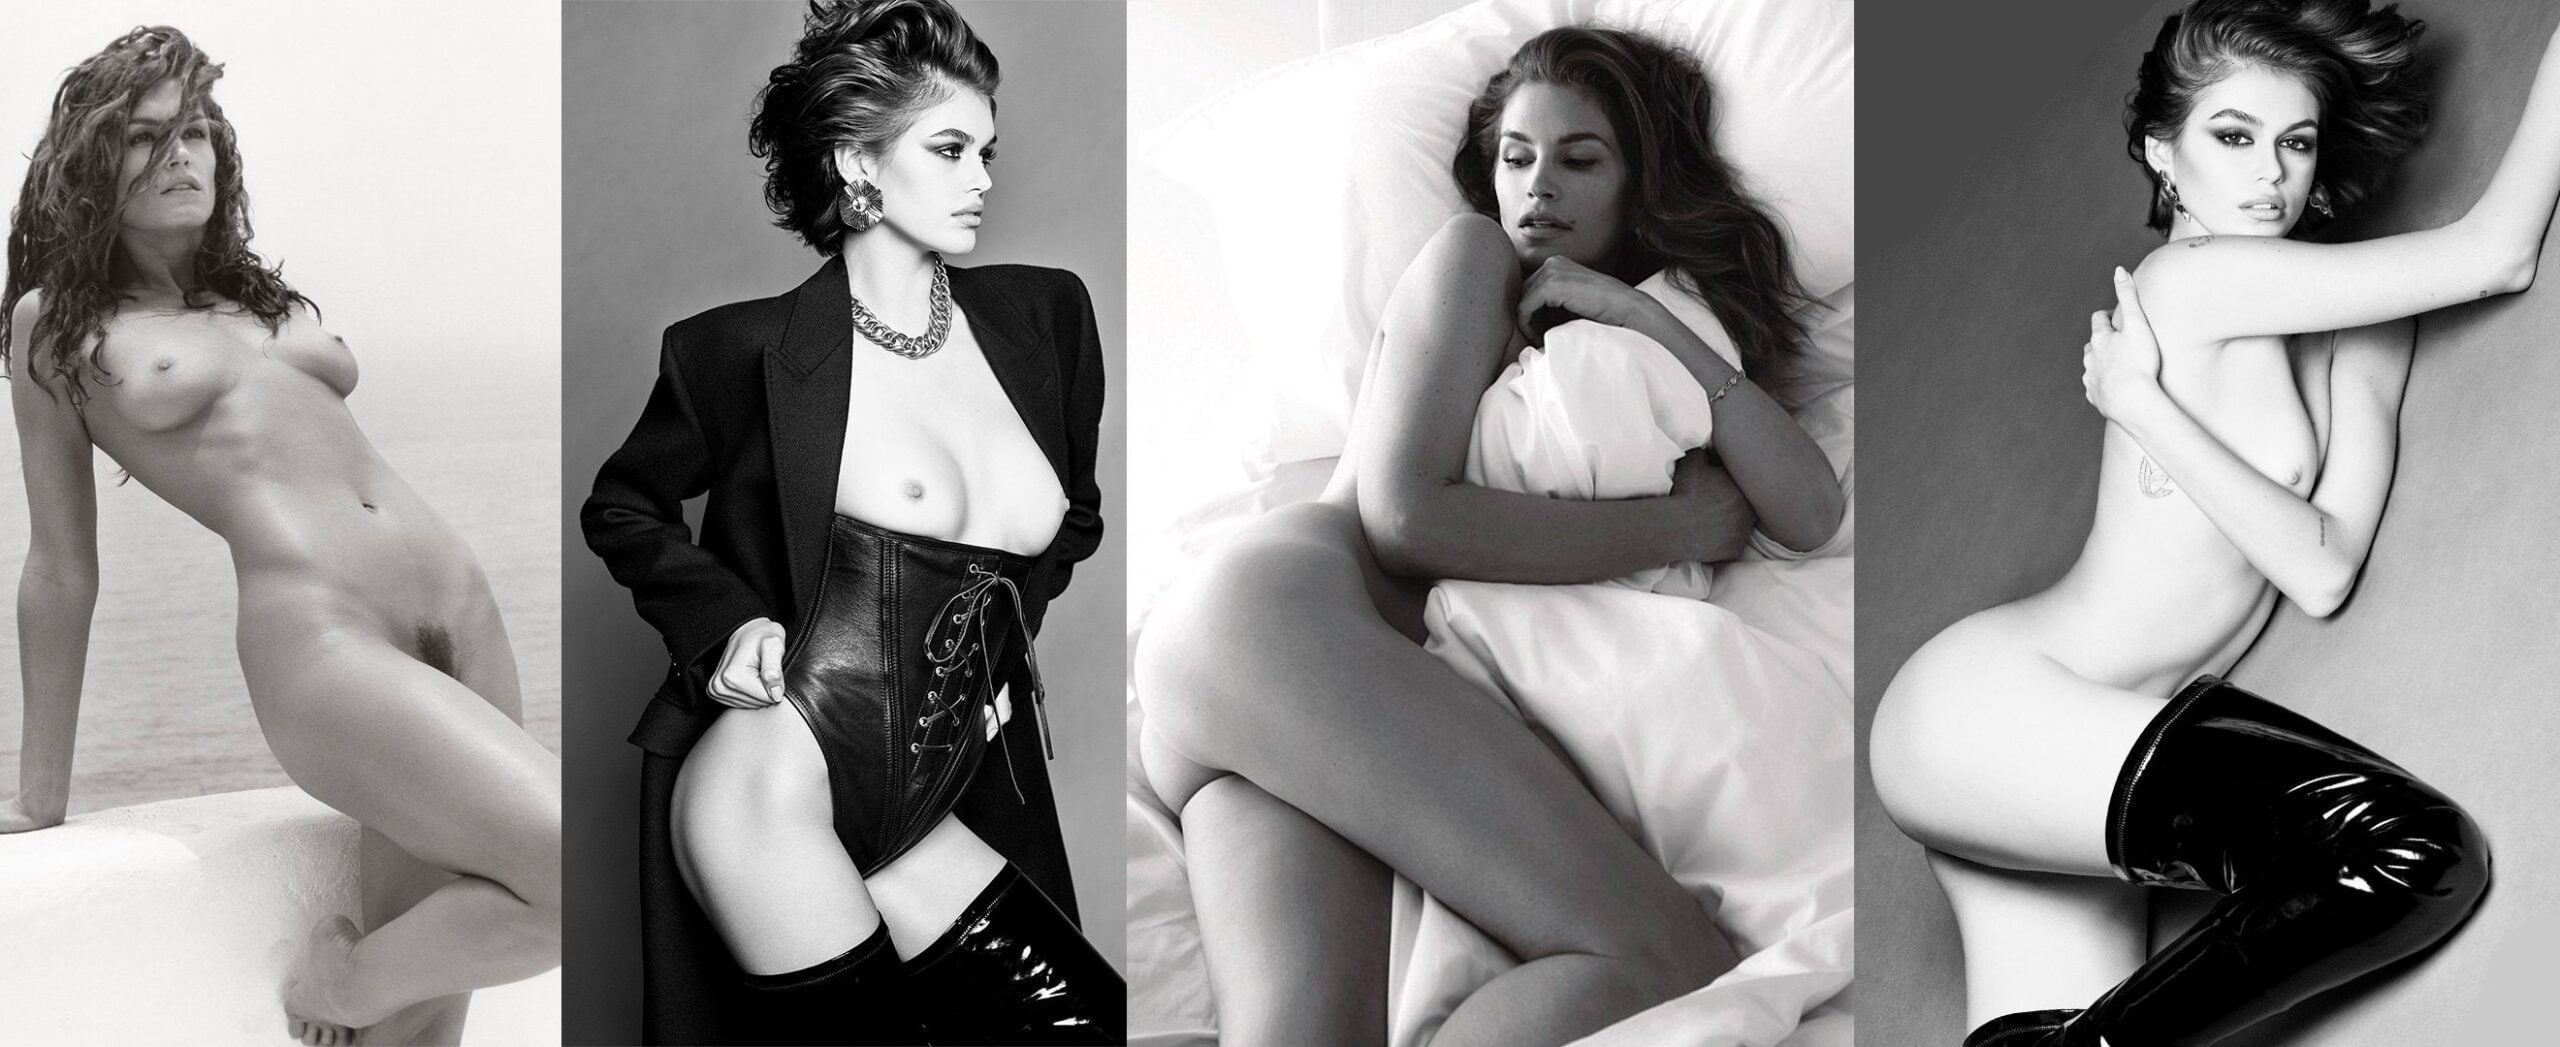 Cindy crawford nude images